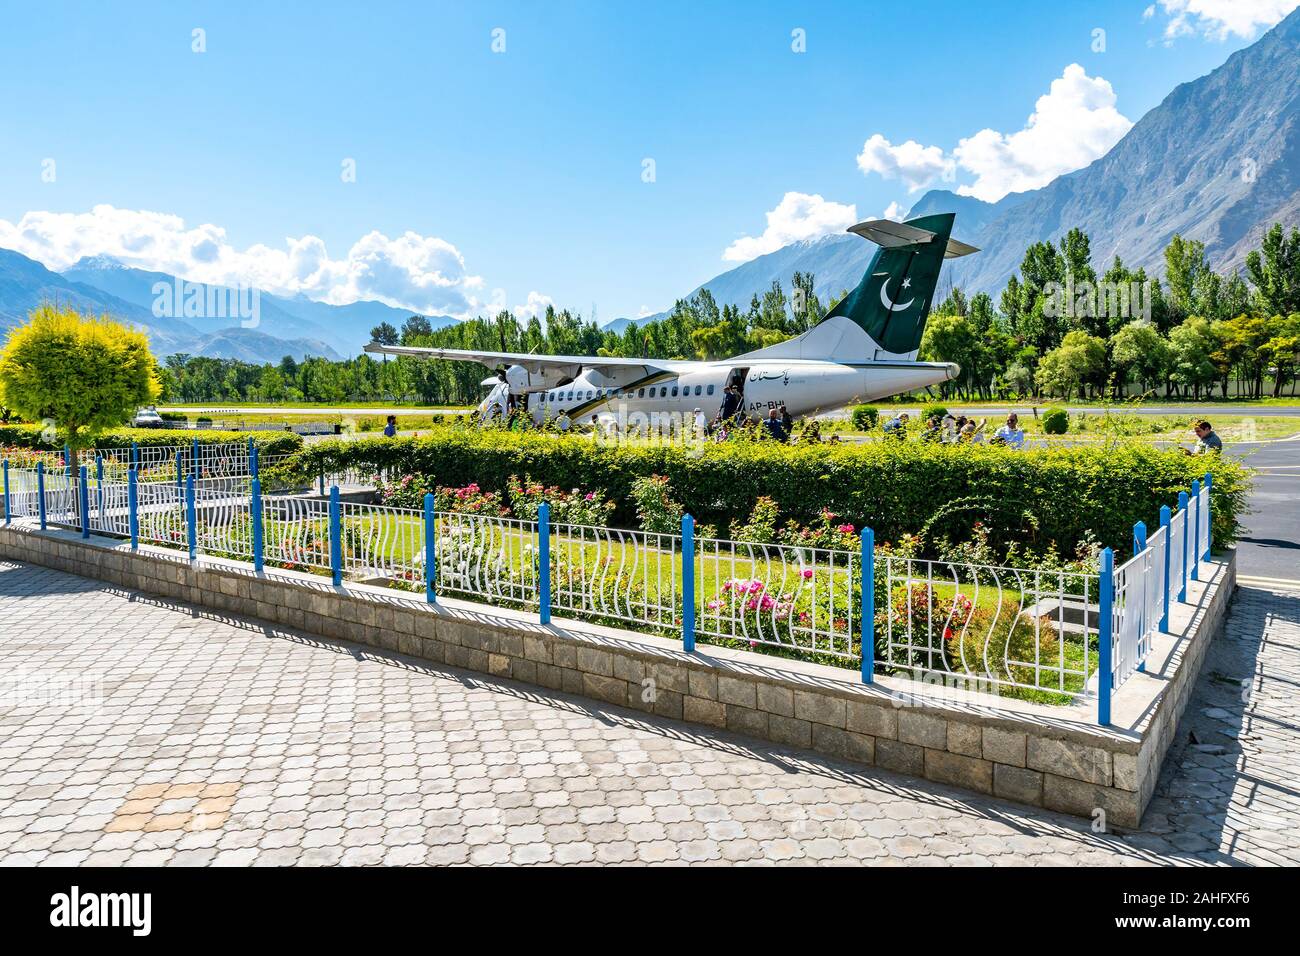 Gilgit Domestic Airport Pakistan Airlines Passengers are Exiting the Plane on a Sunny Blue Sky Day Stock Photo